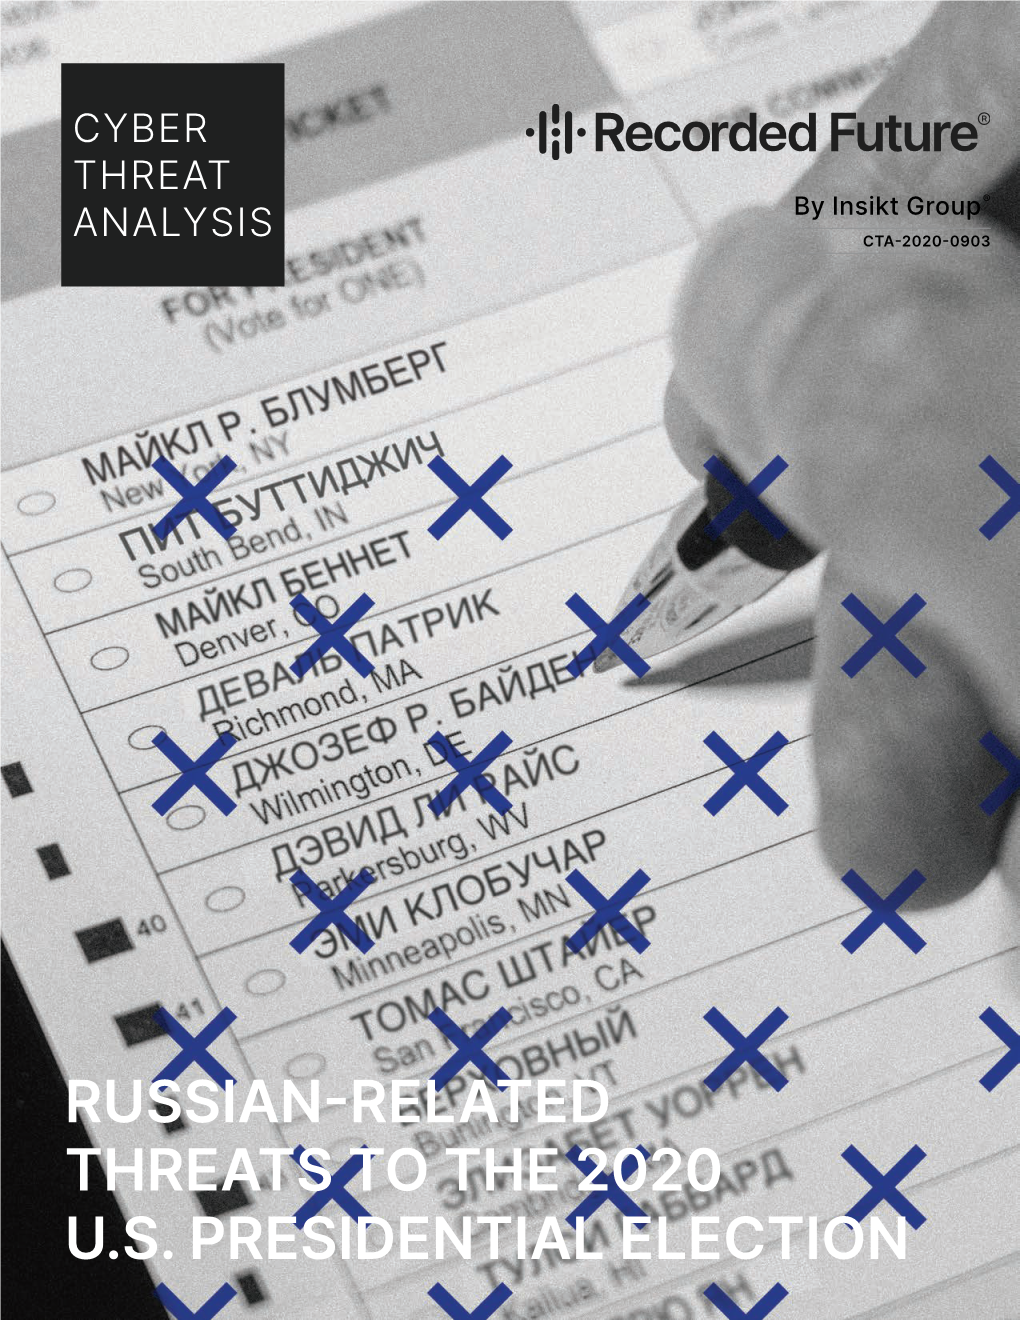 Russian-Related Threats to the 2020 U.S. Presidential Election Cyber Threat Analysis